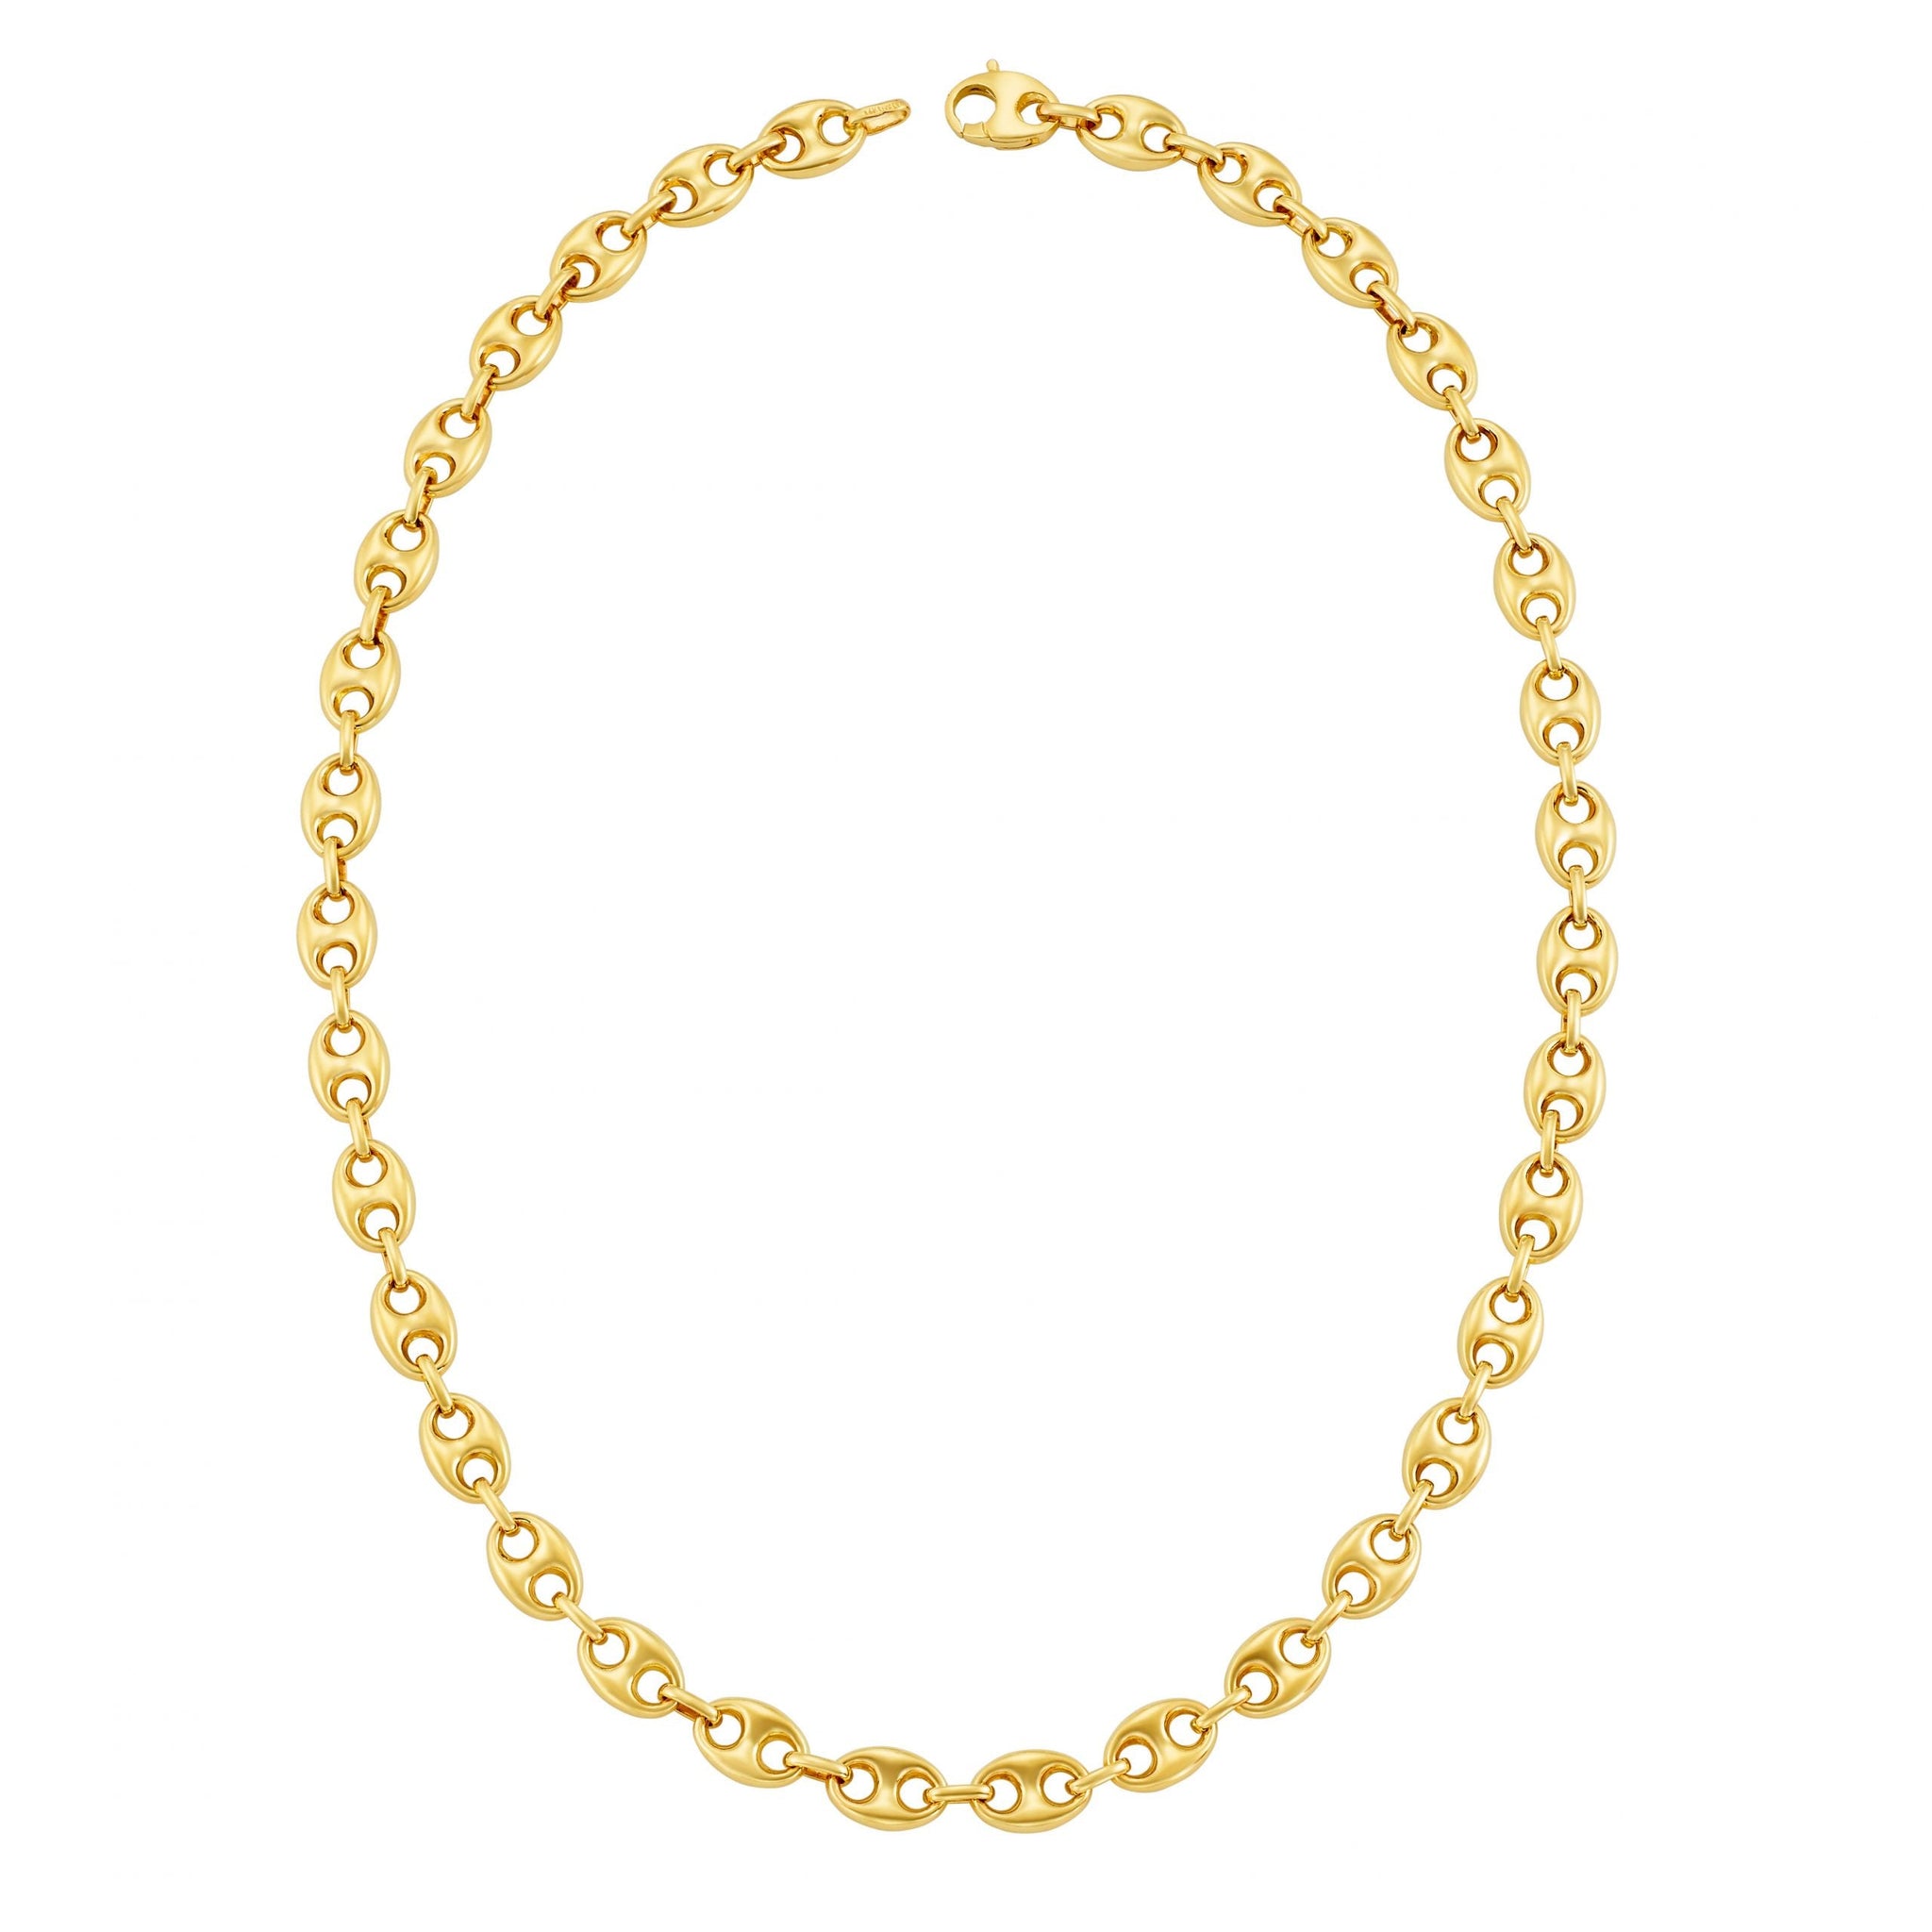 14k Gold Gucci Style Link Chain Necklace